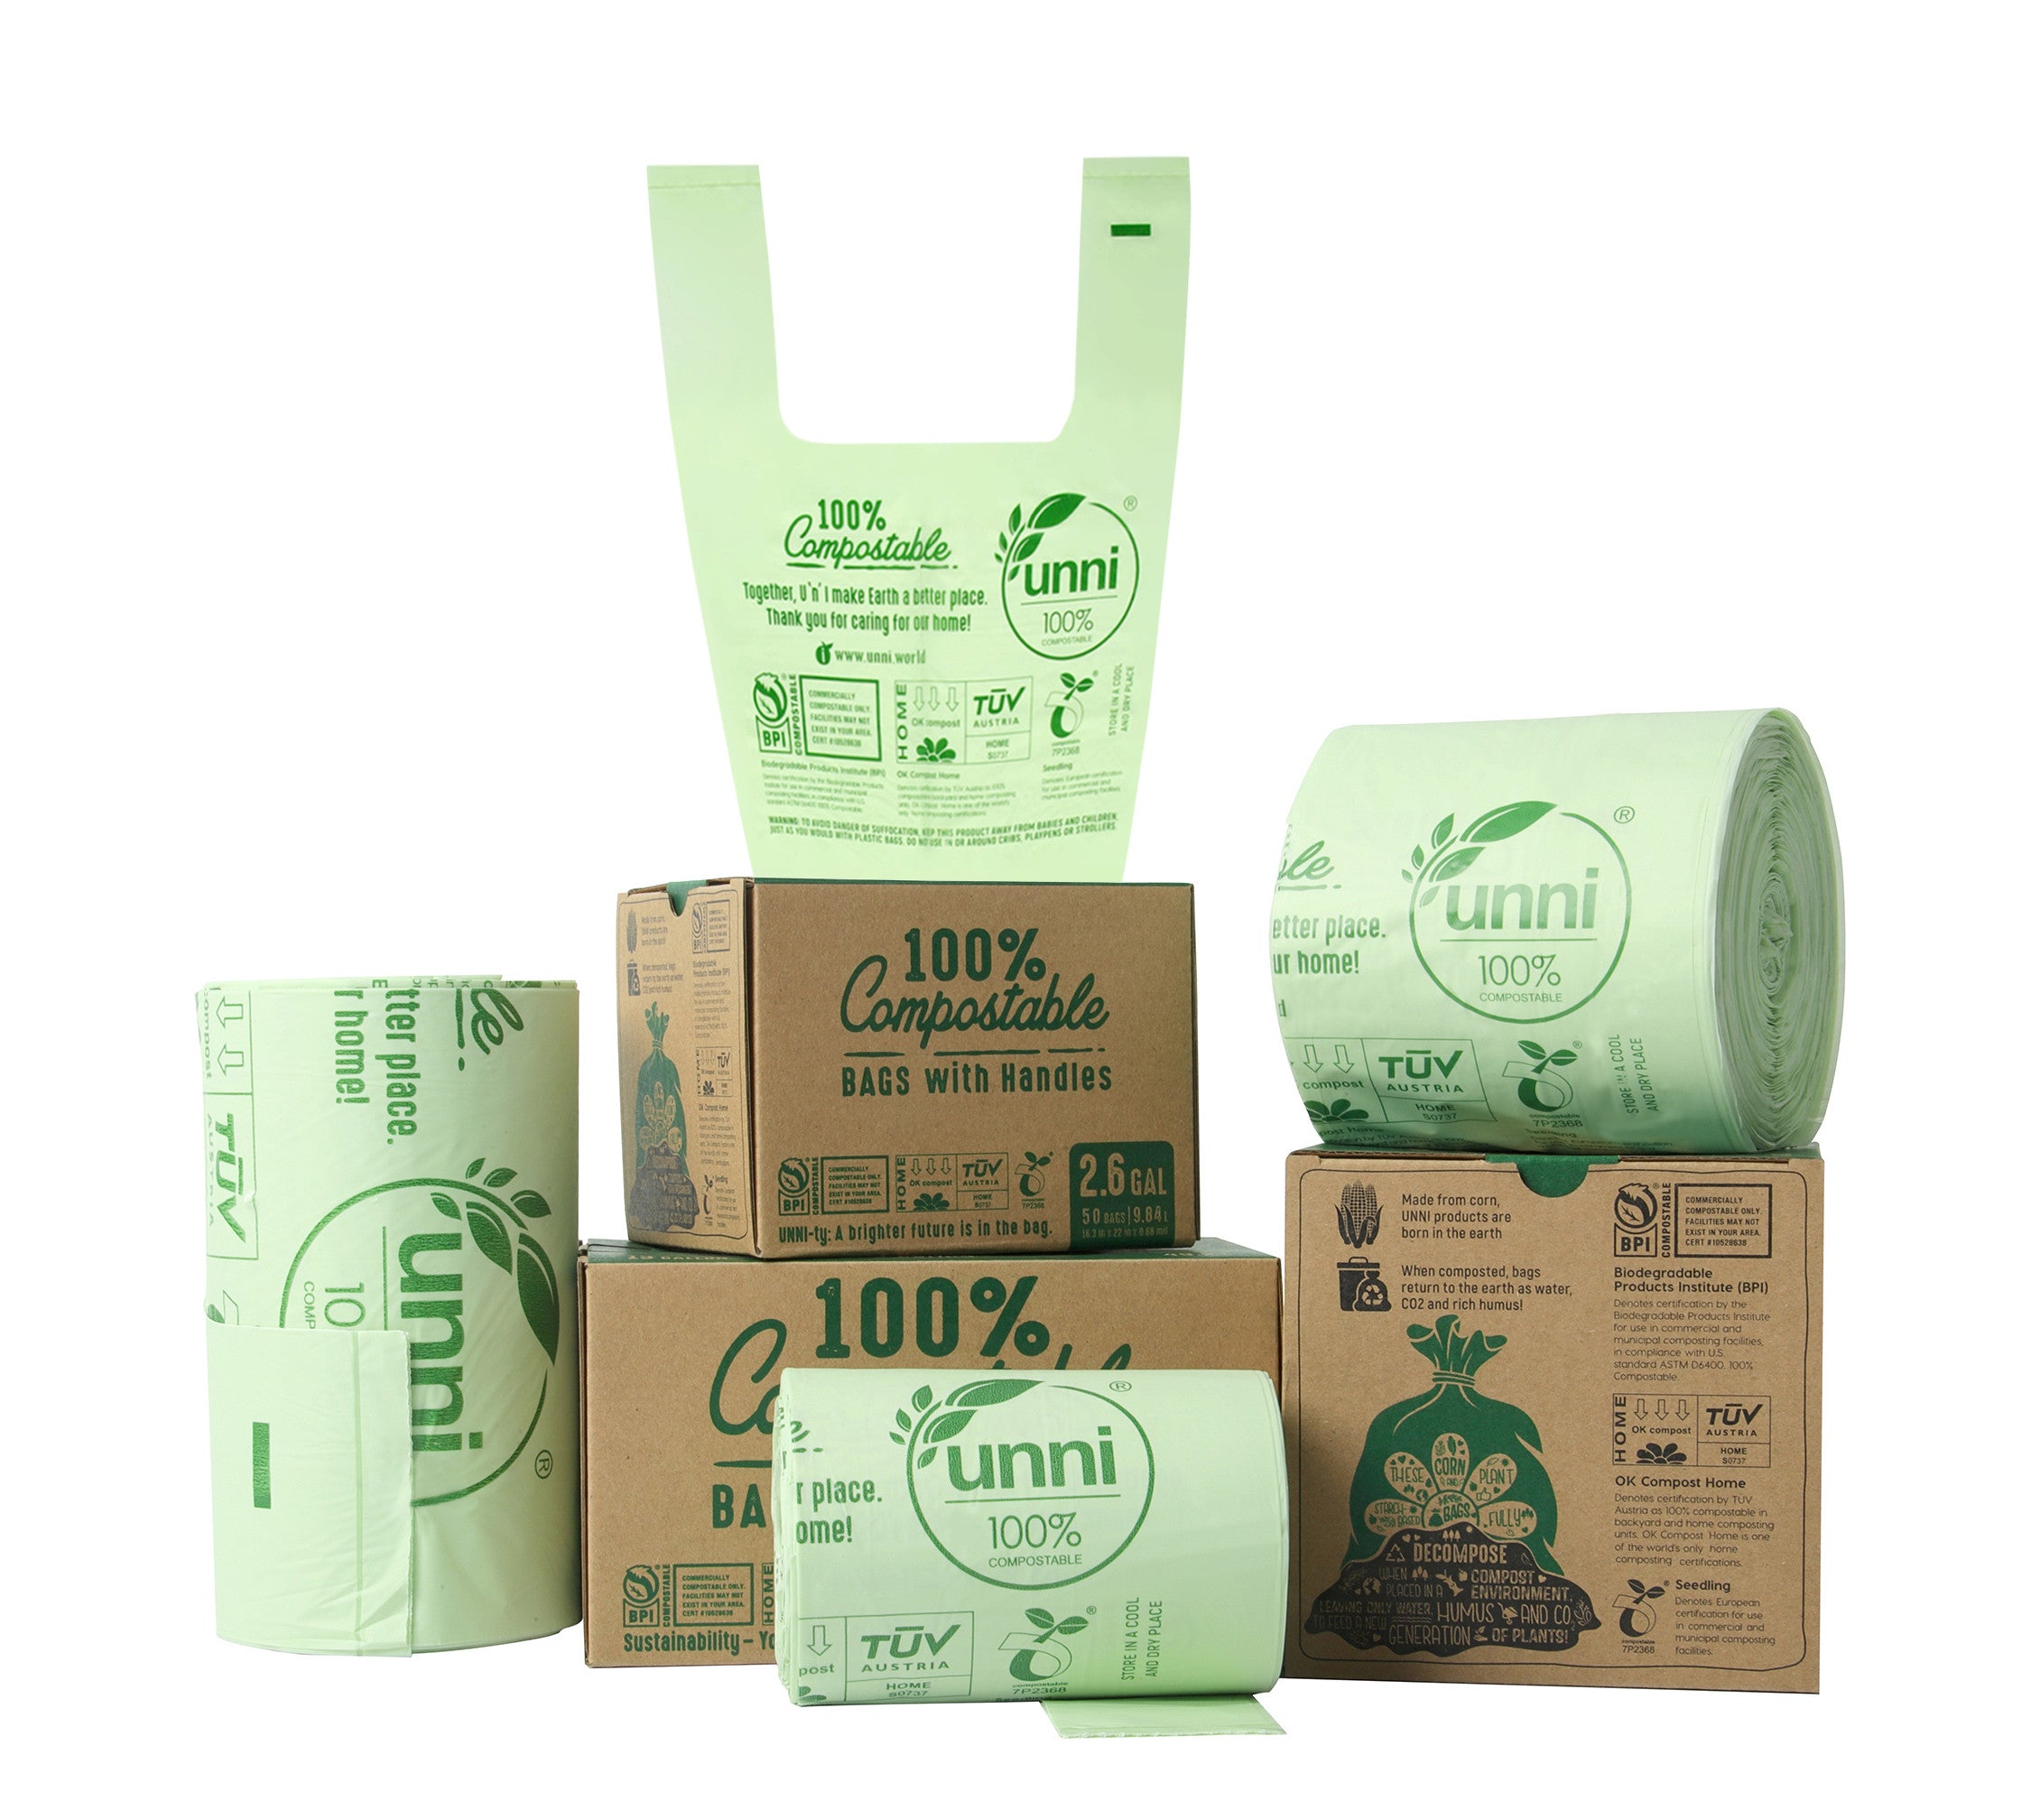 3 Gallon, 11.35 Liter, Compostable Bags with Handles